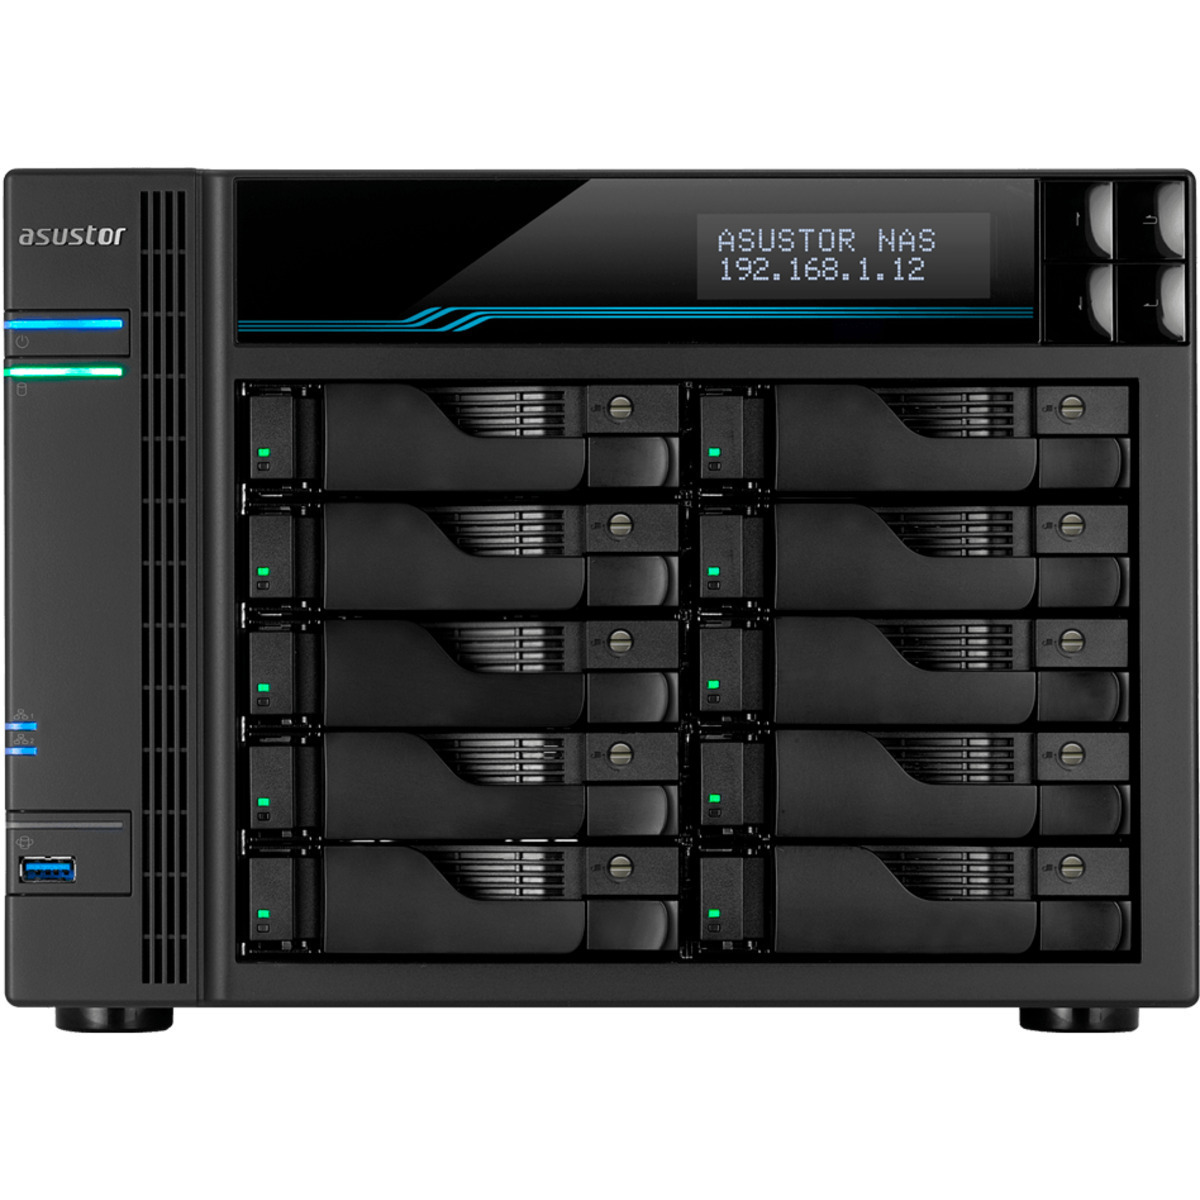 ASUSTOR AS6510T Lockerstor 10 100tb 10-Bay Desktop Multimedia / Power User / Business NAS - Network Attached Storage Device 10x10tb Seagate EXOS X18 ST10000NM018G 3.5 7200rpm SATA 6Gb/s HDD ENTERPRISE Class Drives Installed - Burn-In Tested - FREE RAM UPGRADE AS6510T Lockerstor 10